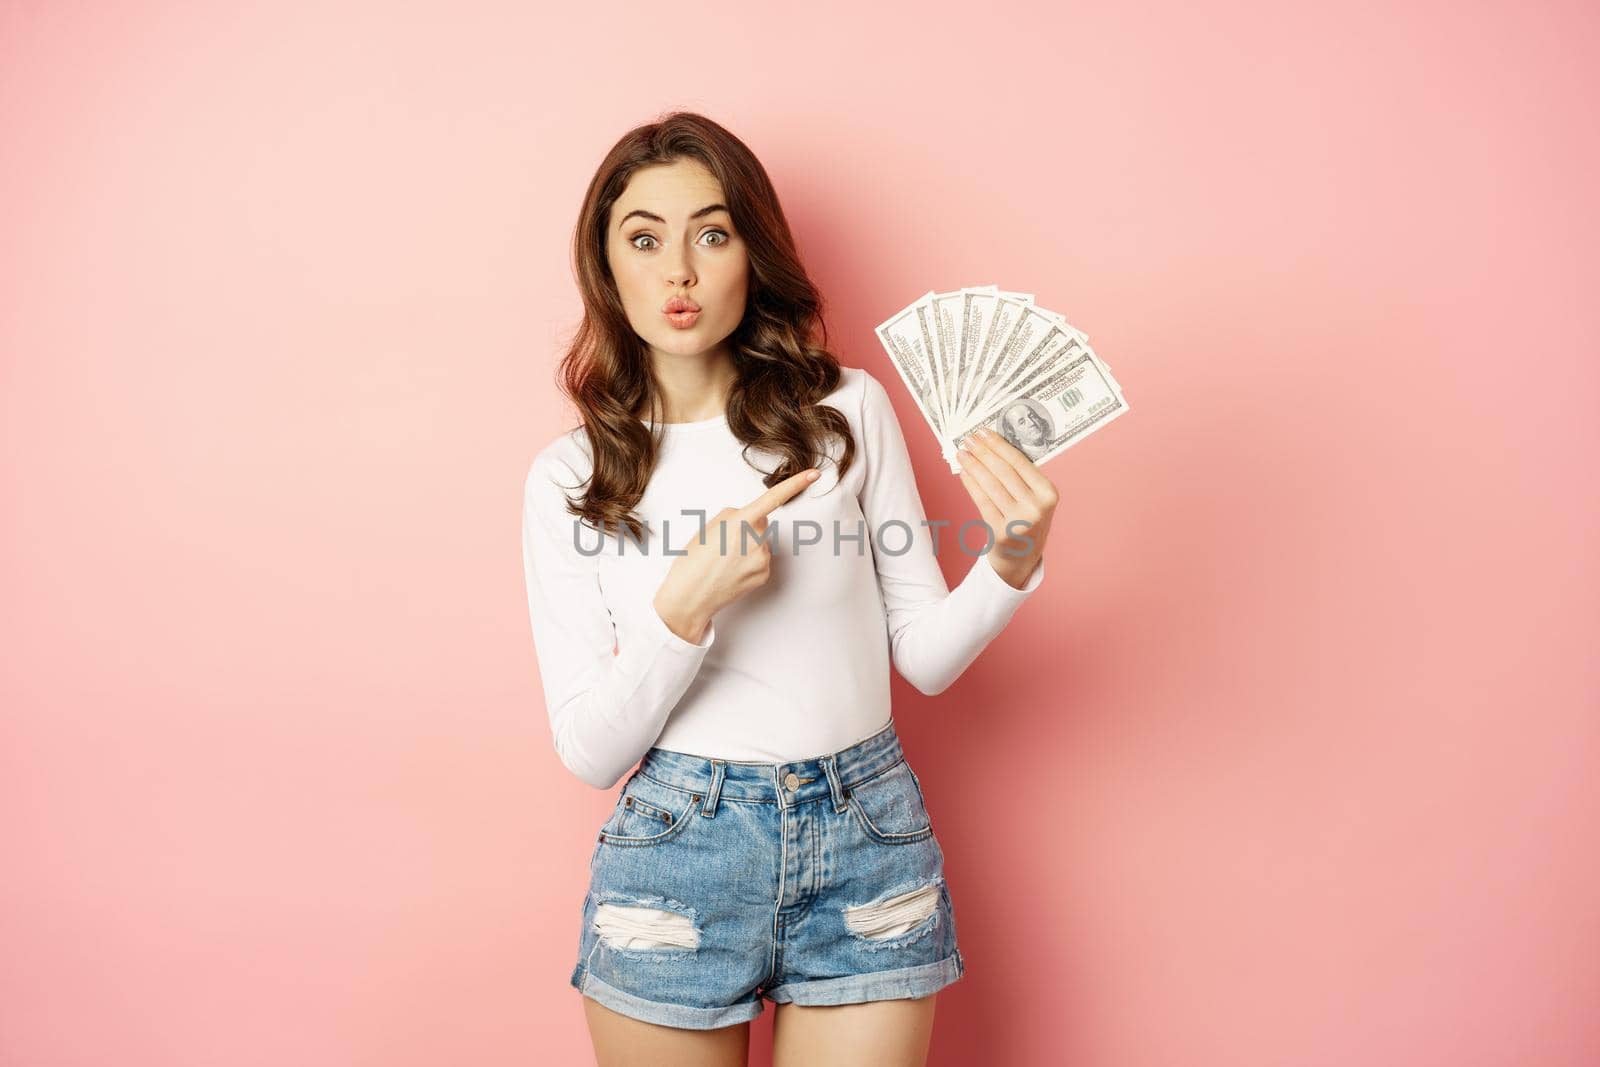 Attractive young woman holding money, cash in hands, concept of loans, microcredit and shopping, standing over pink background. Copy space